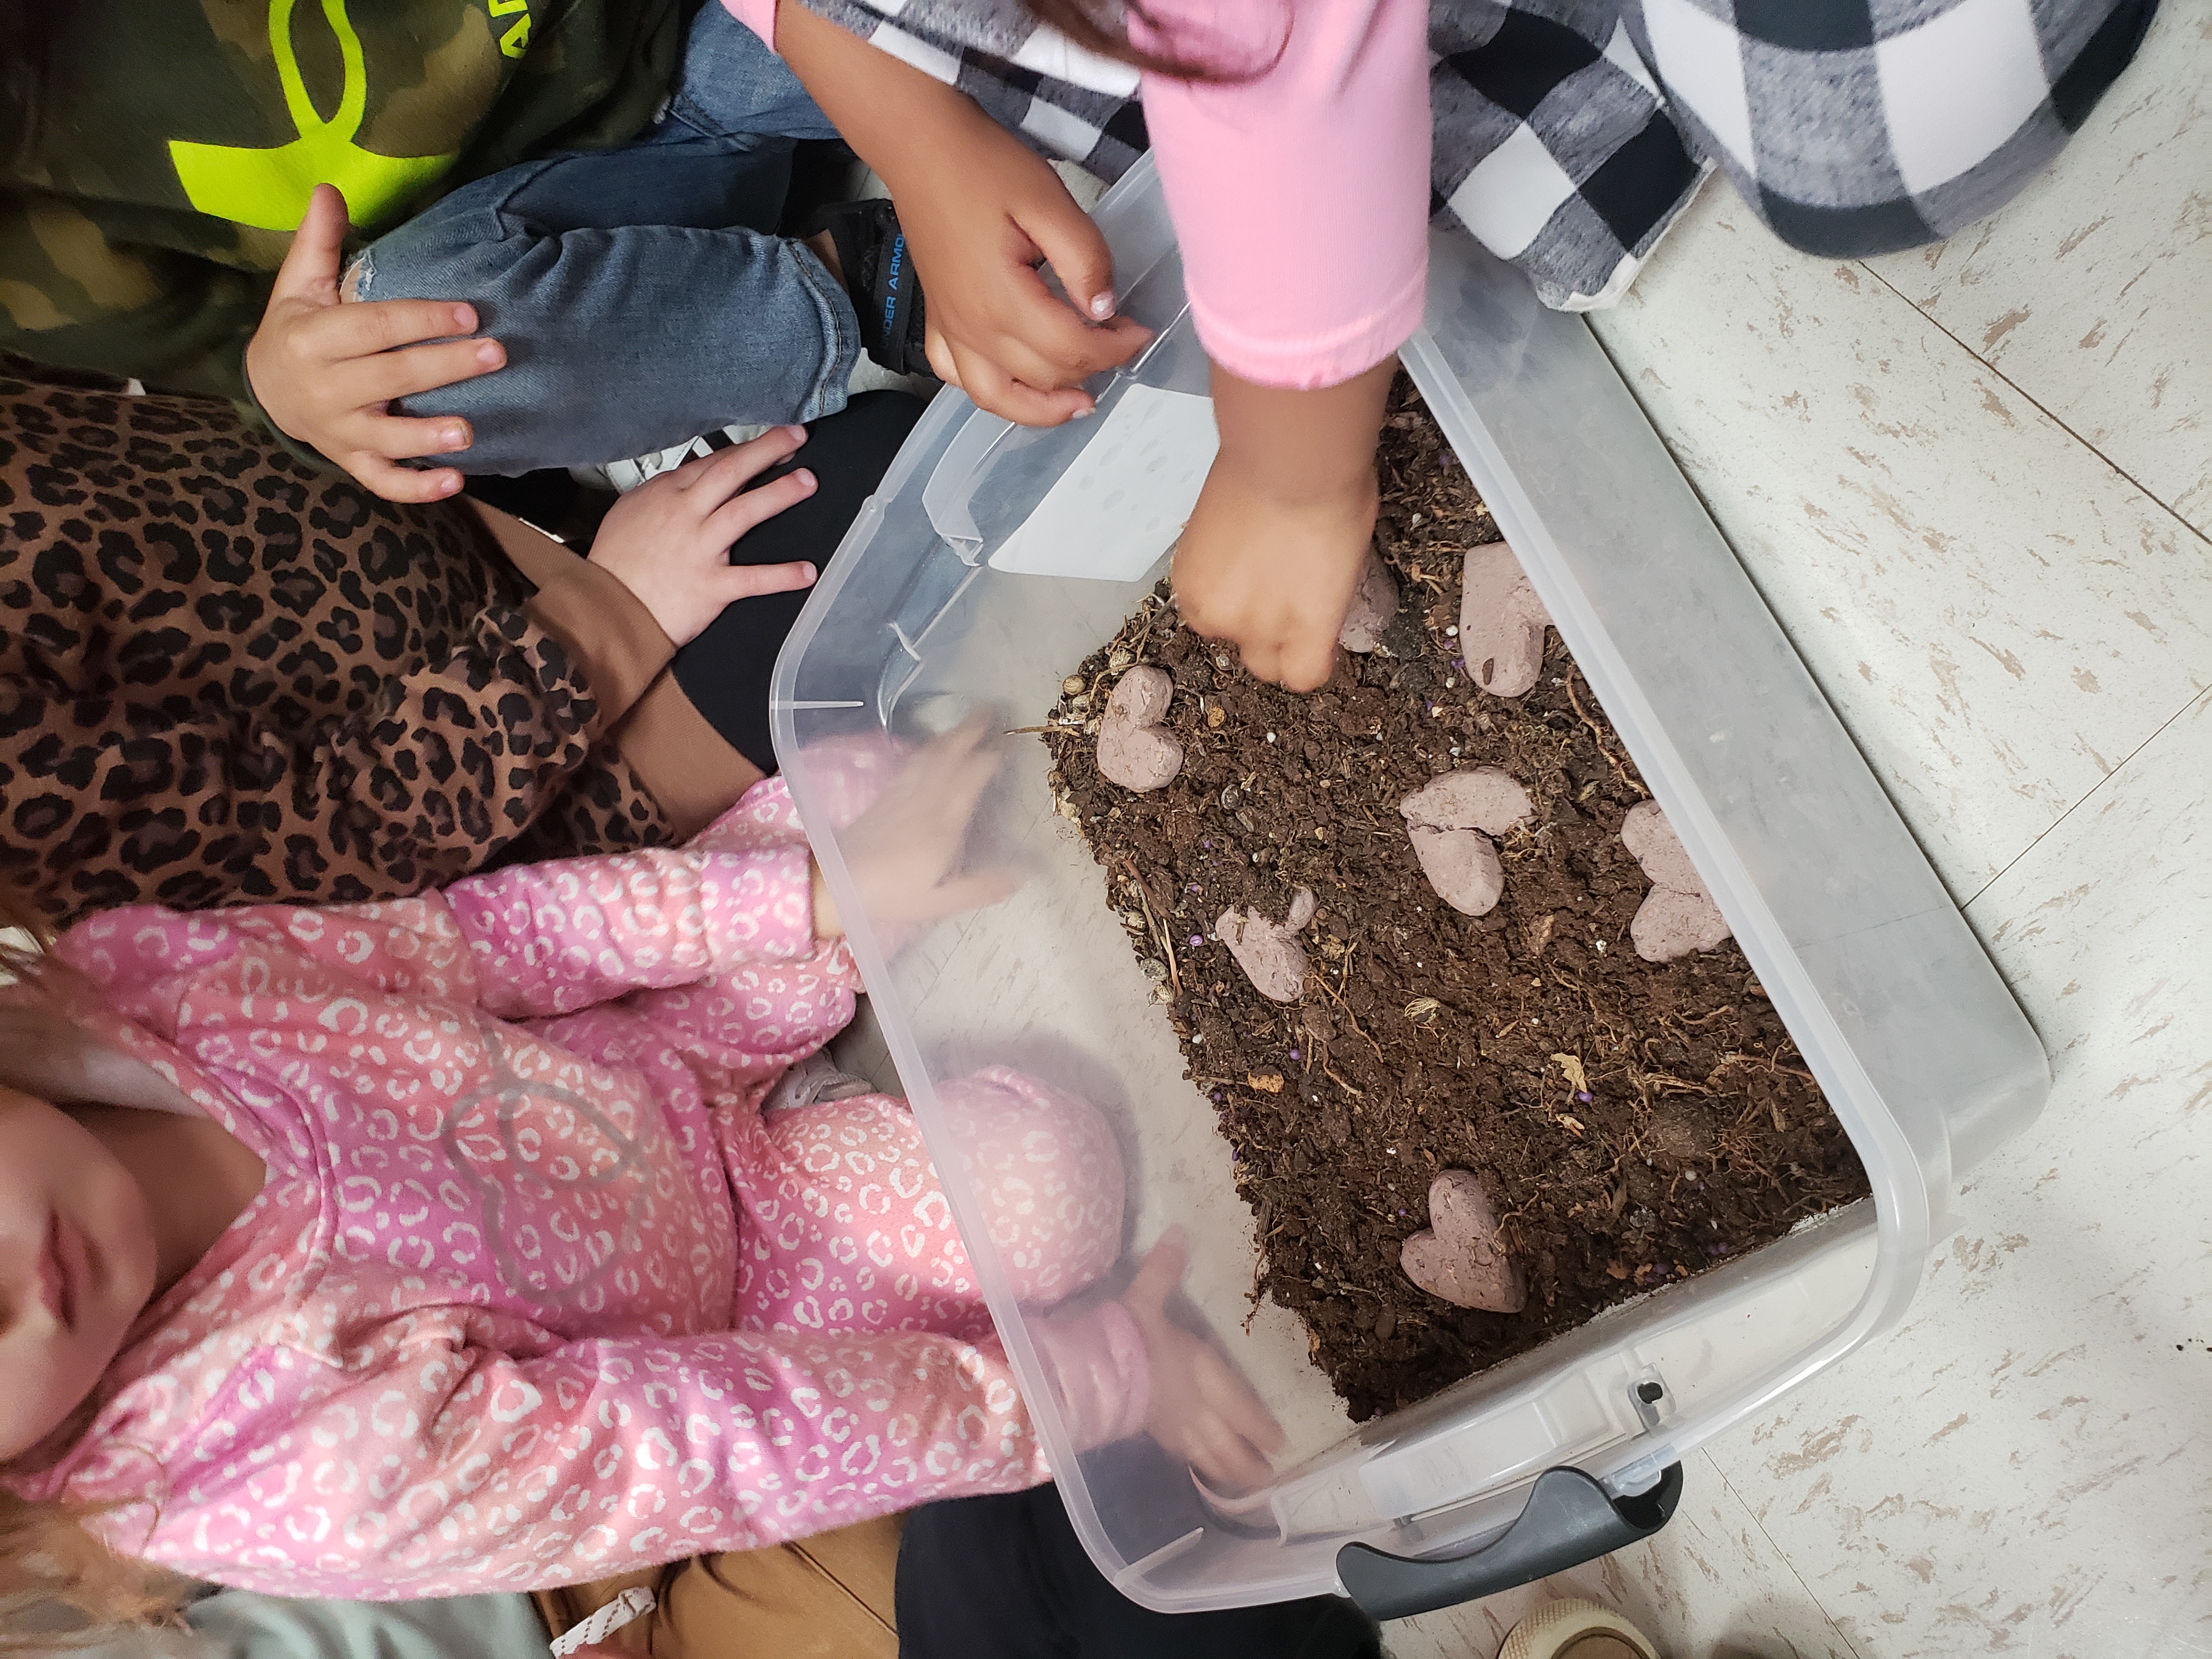 Tiny PreK hands place seed pods into soil